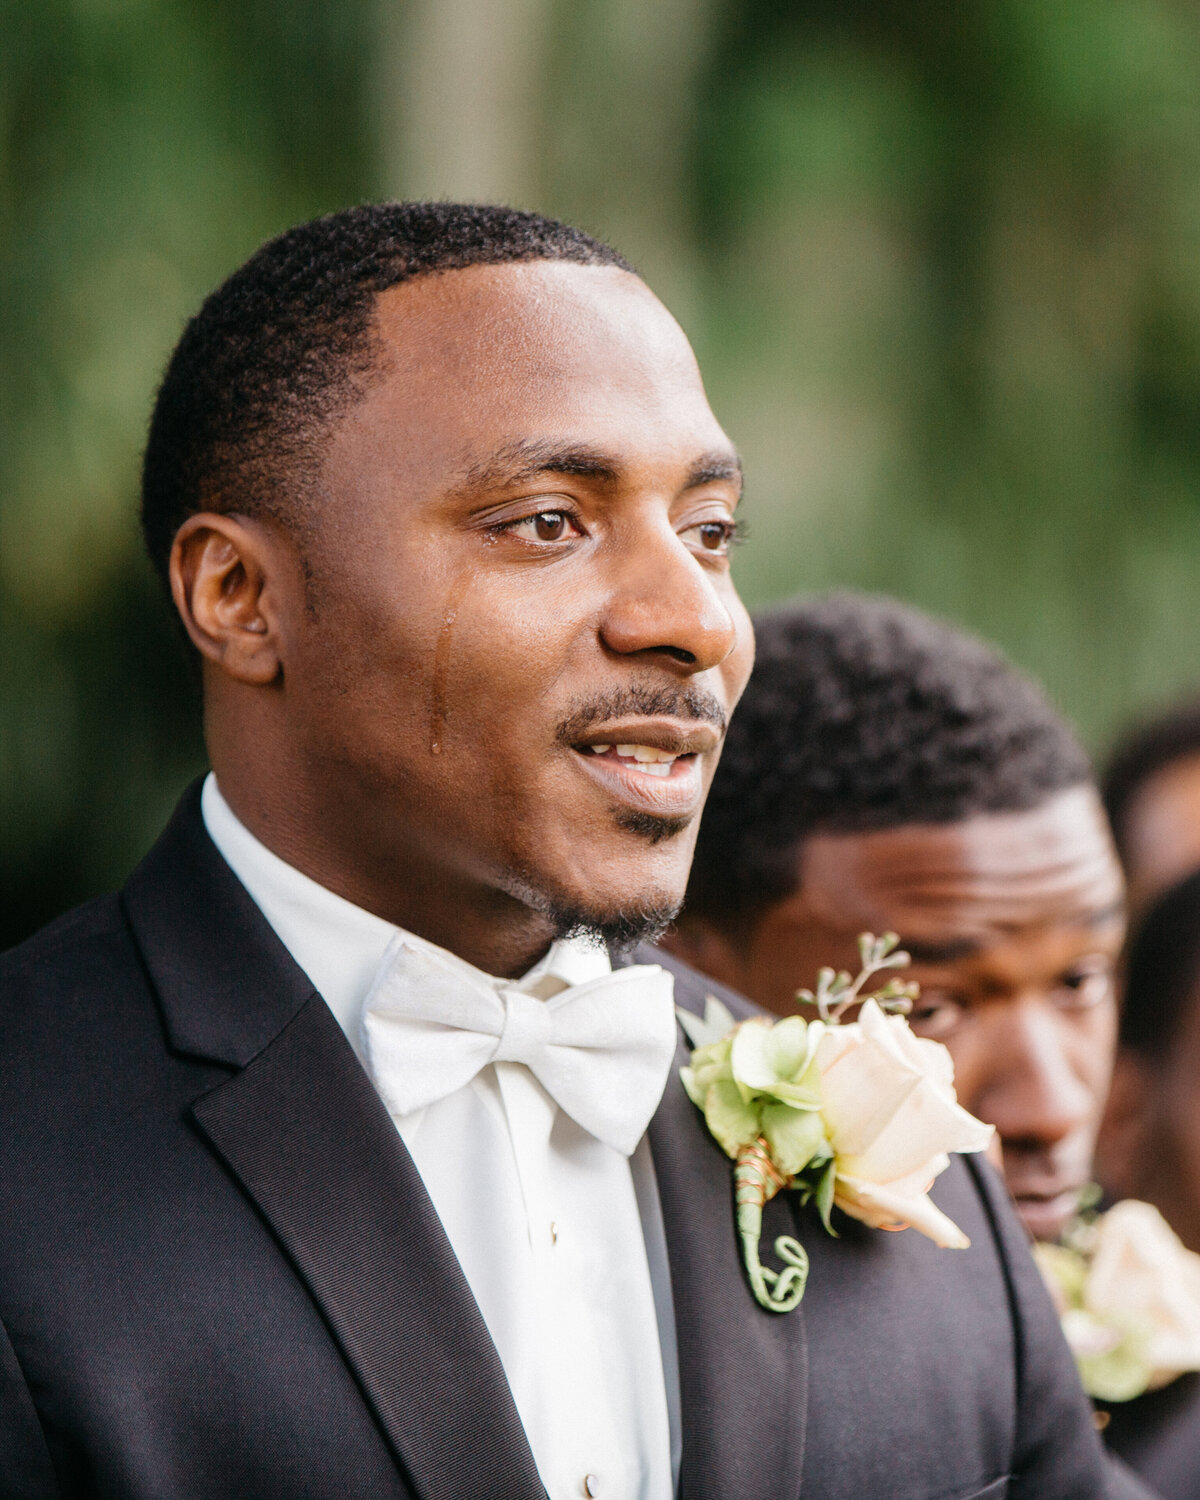 Groom crying as his bride walks down the aisle at their wedding.